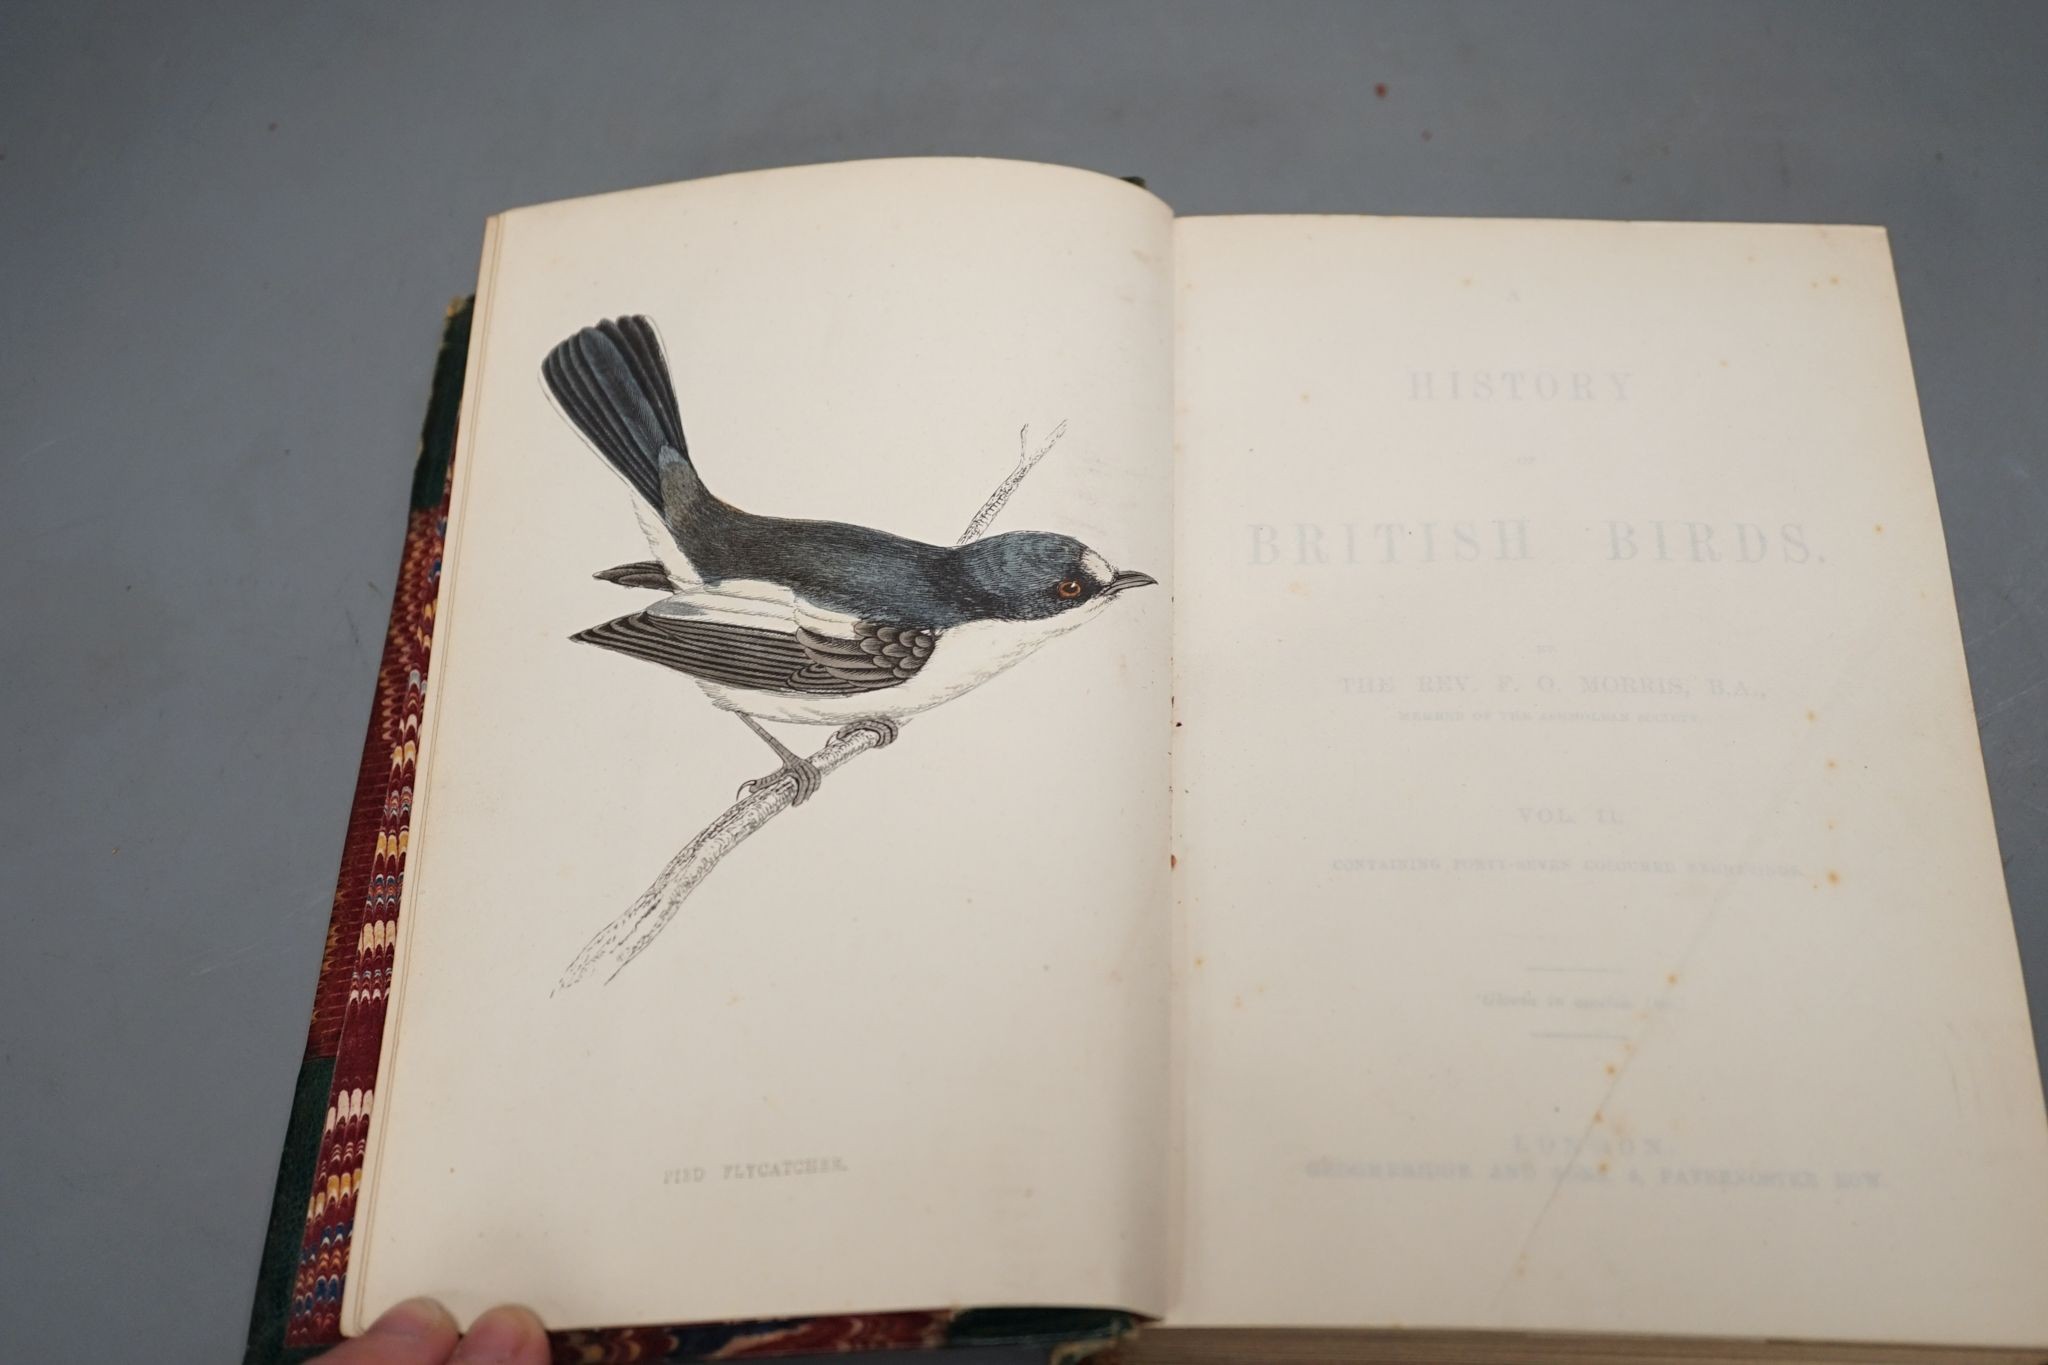 Morris, Rev. F.O. - A History of British Birds, Cabinet Edition, 8 vols, many hand-coloured plates; contemp. gilt half morocco with panelled spines and marbled boards, cr.8vo. (ca.1870)